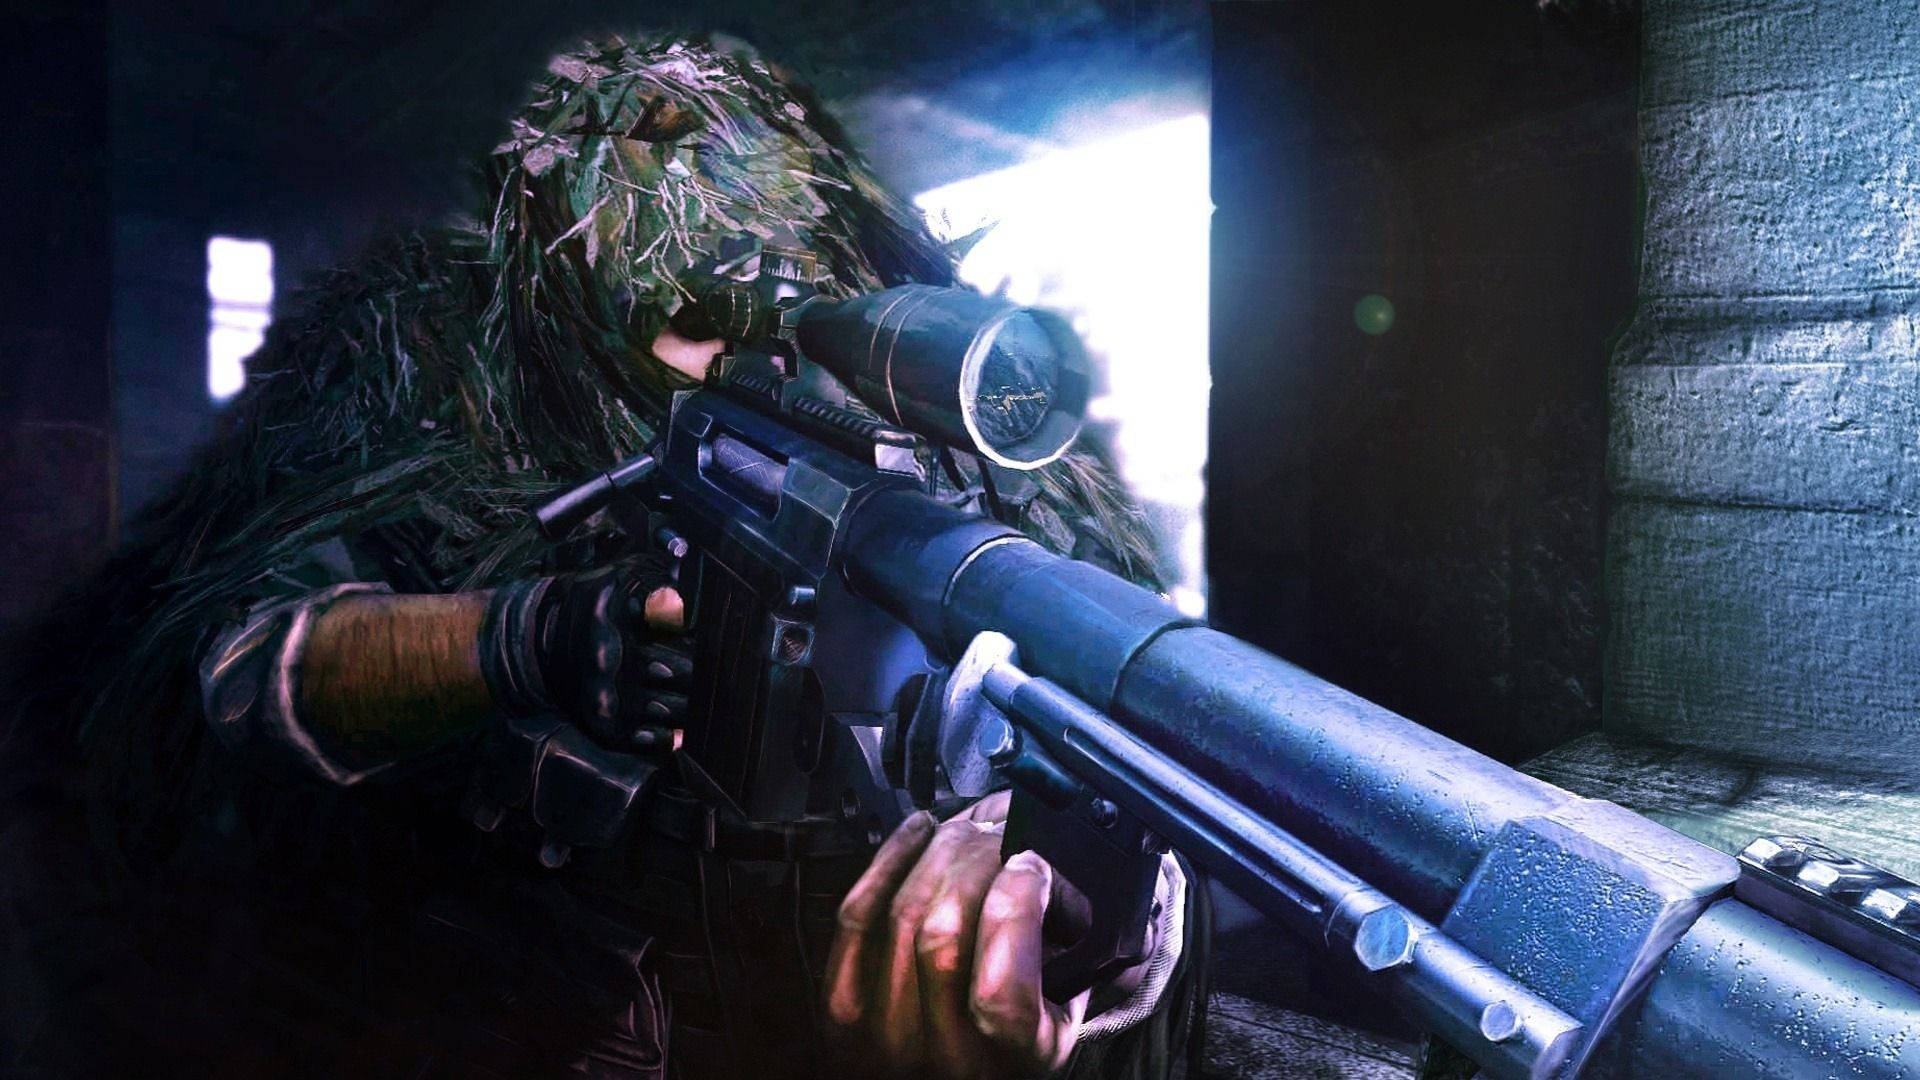 Shooting Sniper Army Soldier Wallpaper